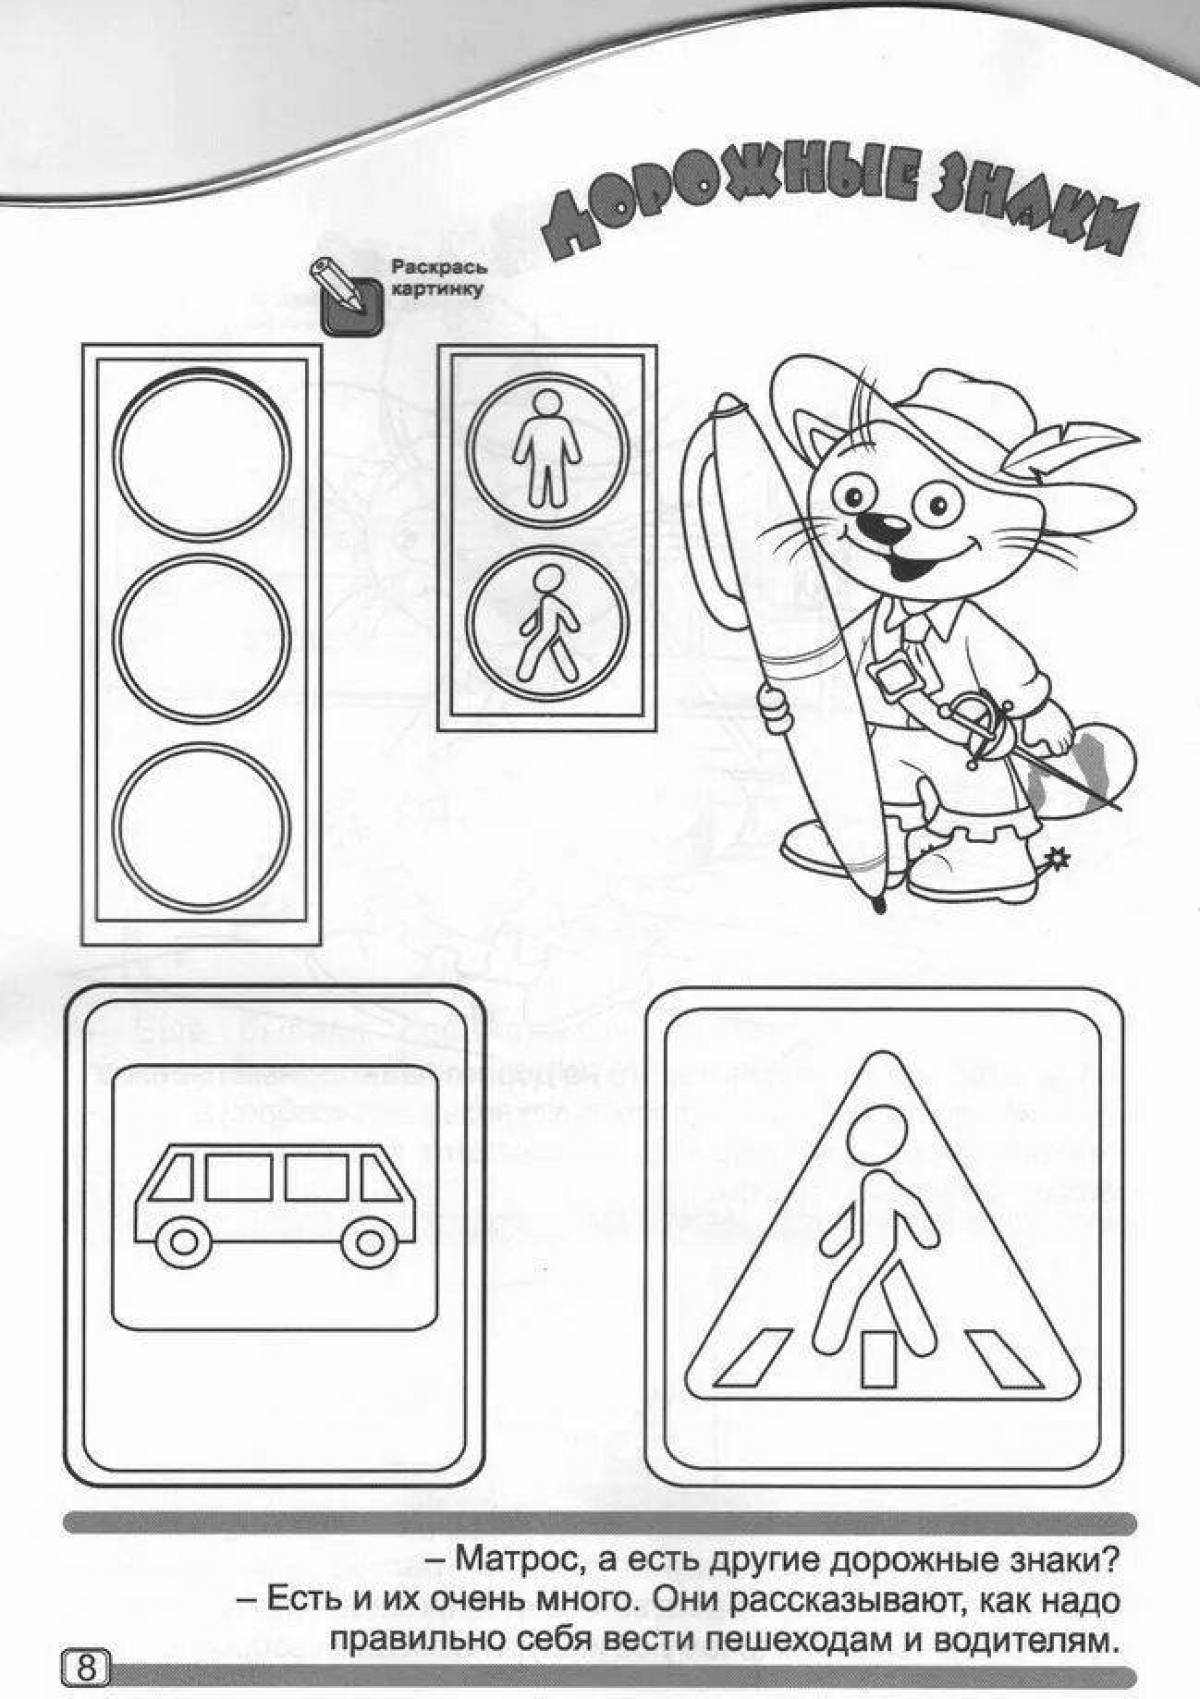 Safety stimulating coloring book for preschoolers